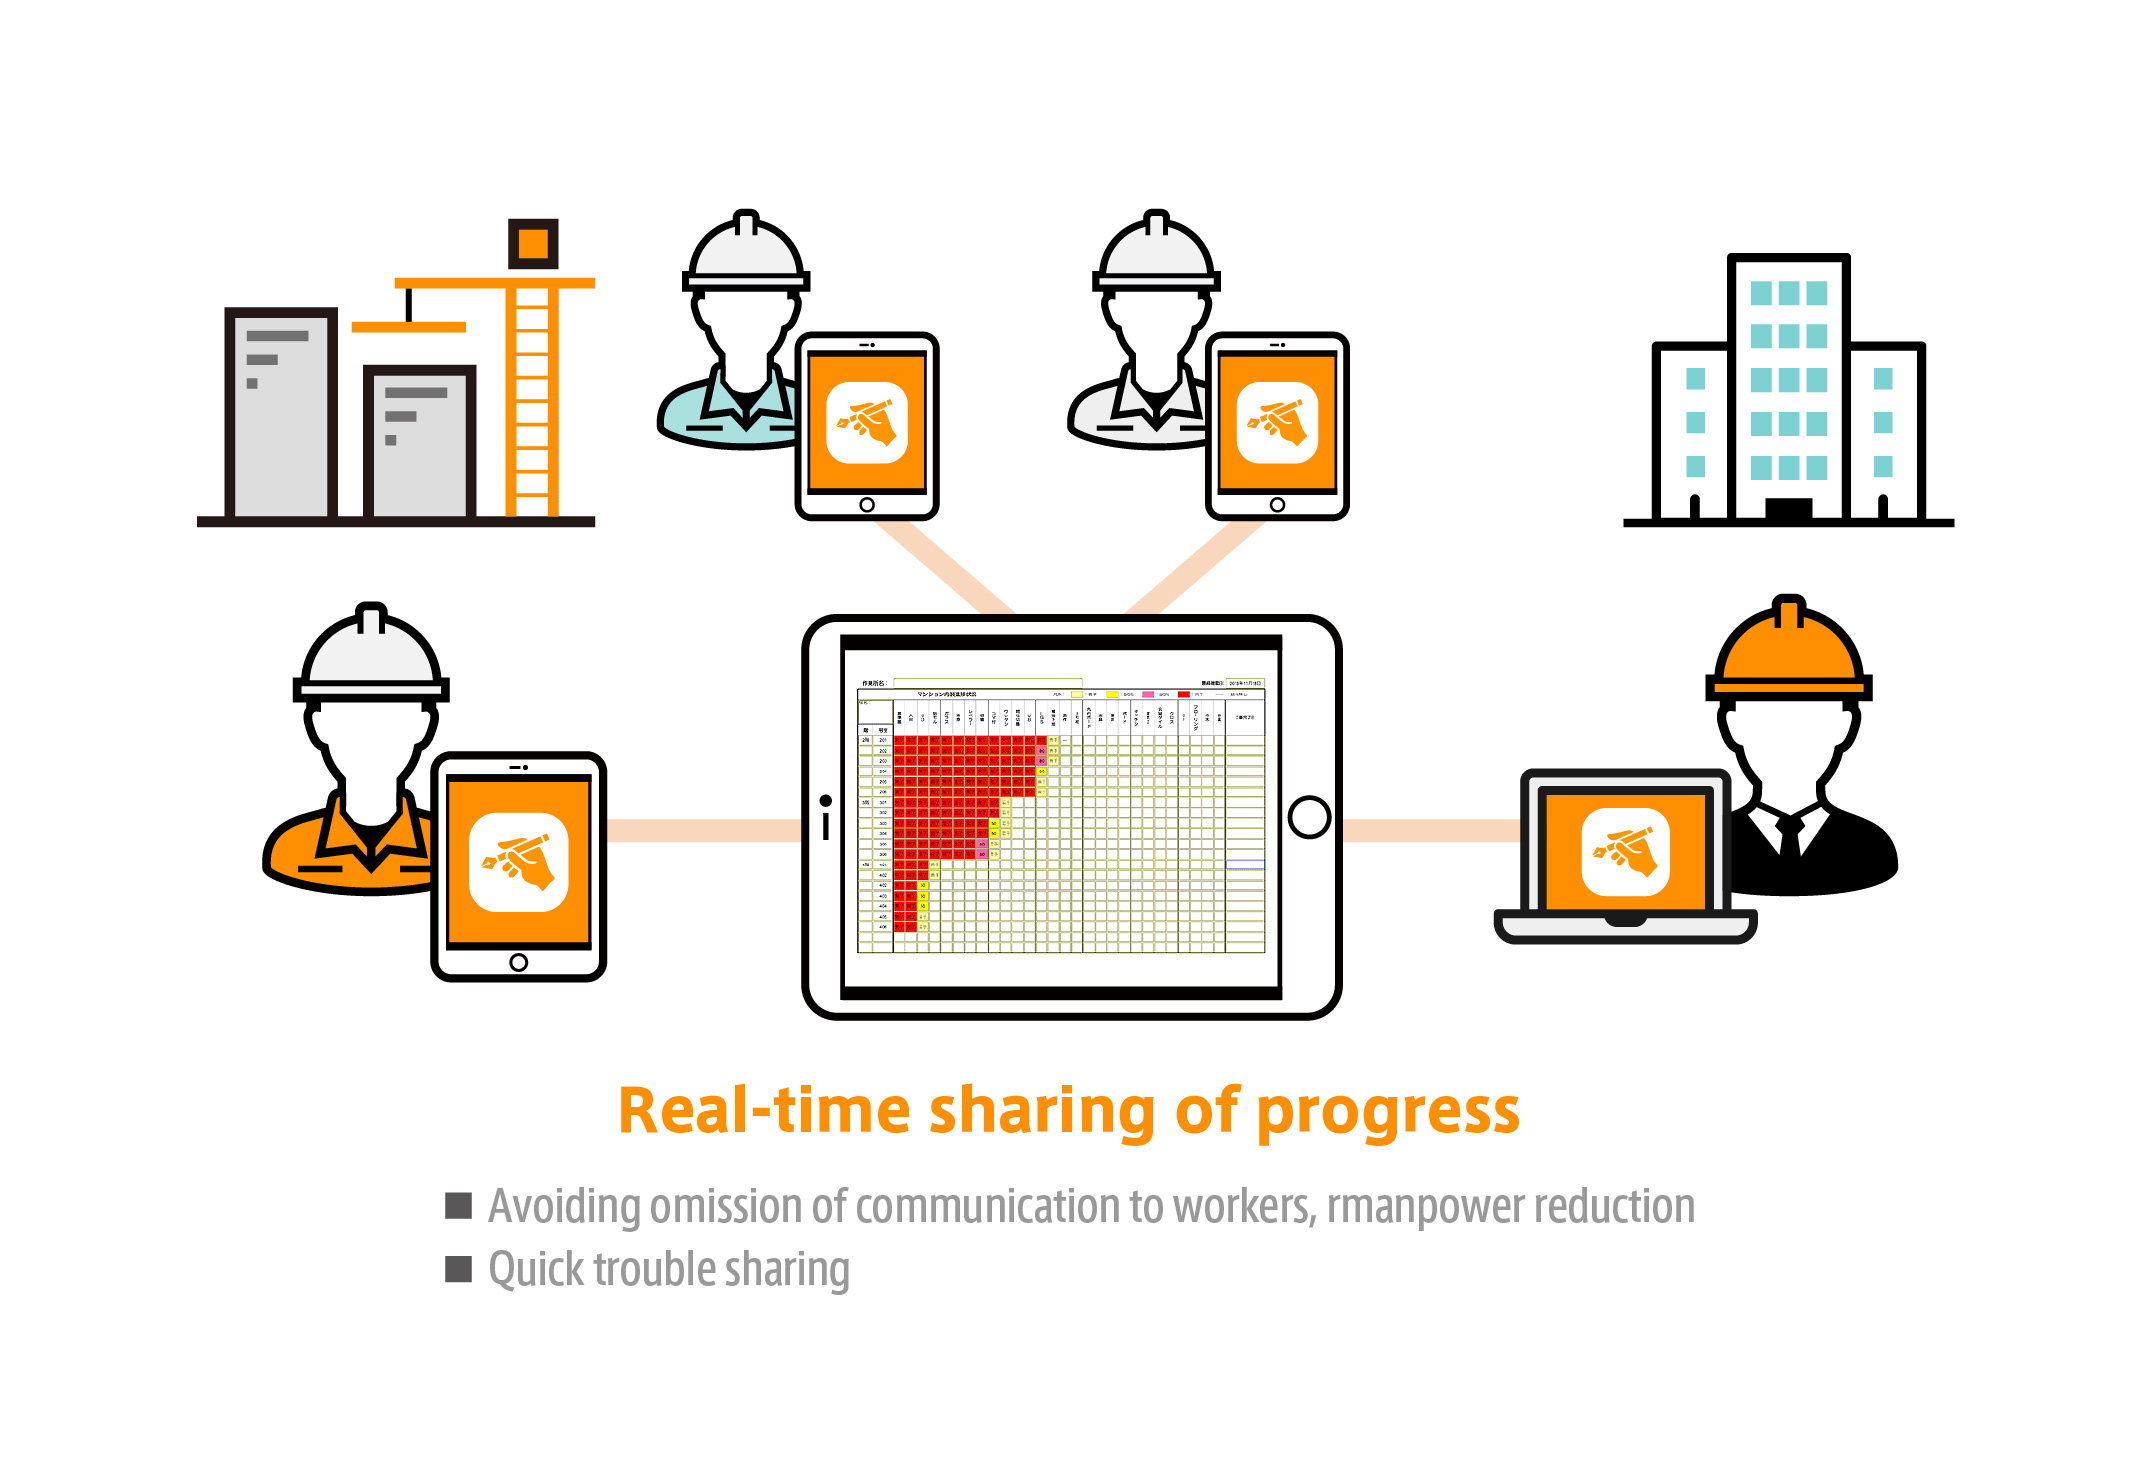 Real-time sharing of progress among workers